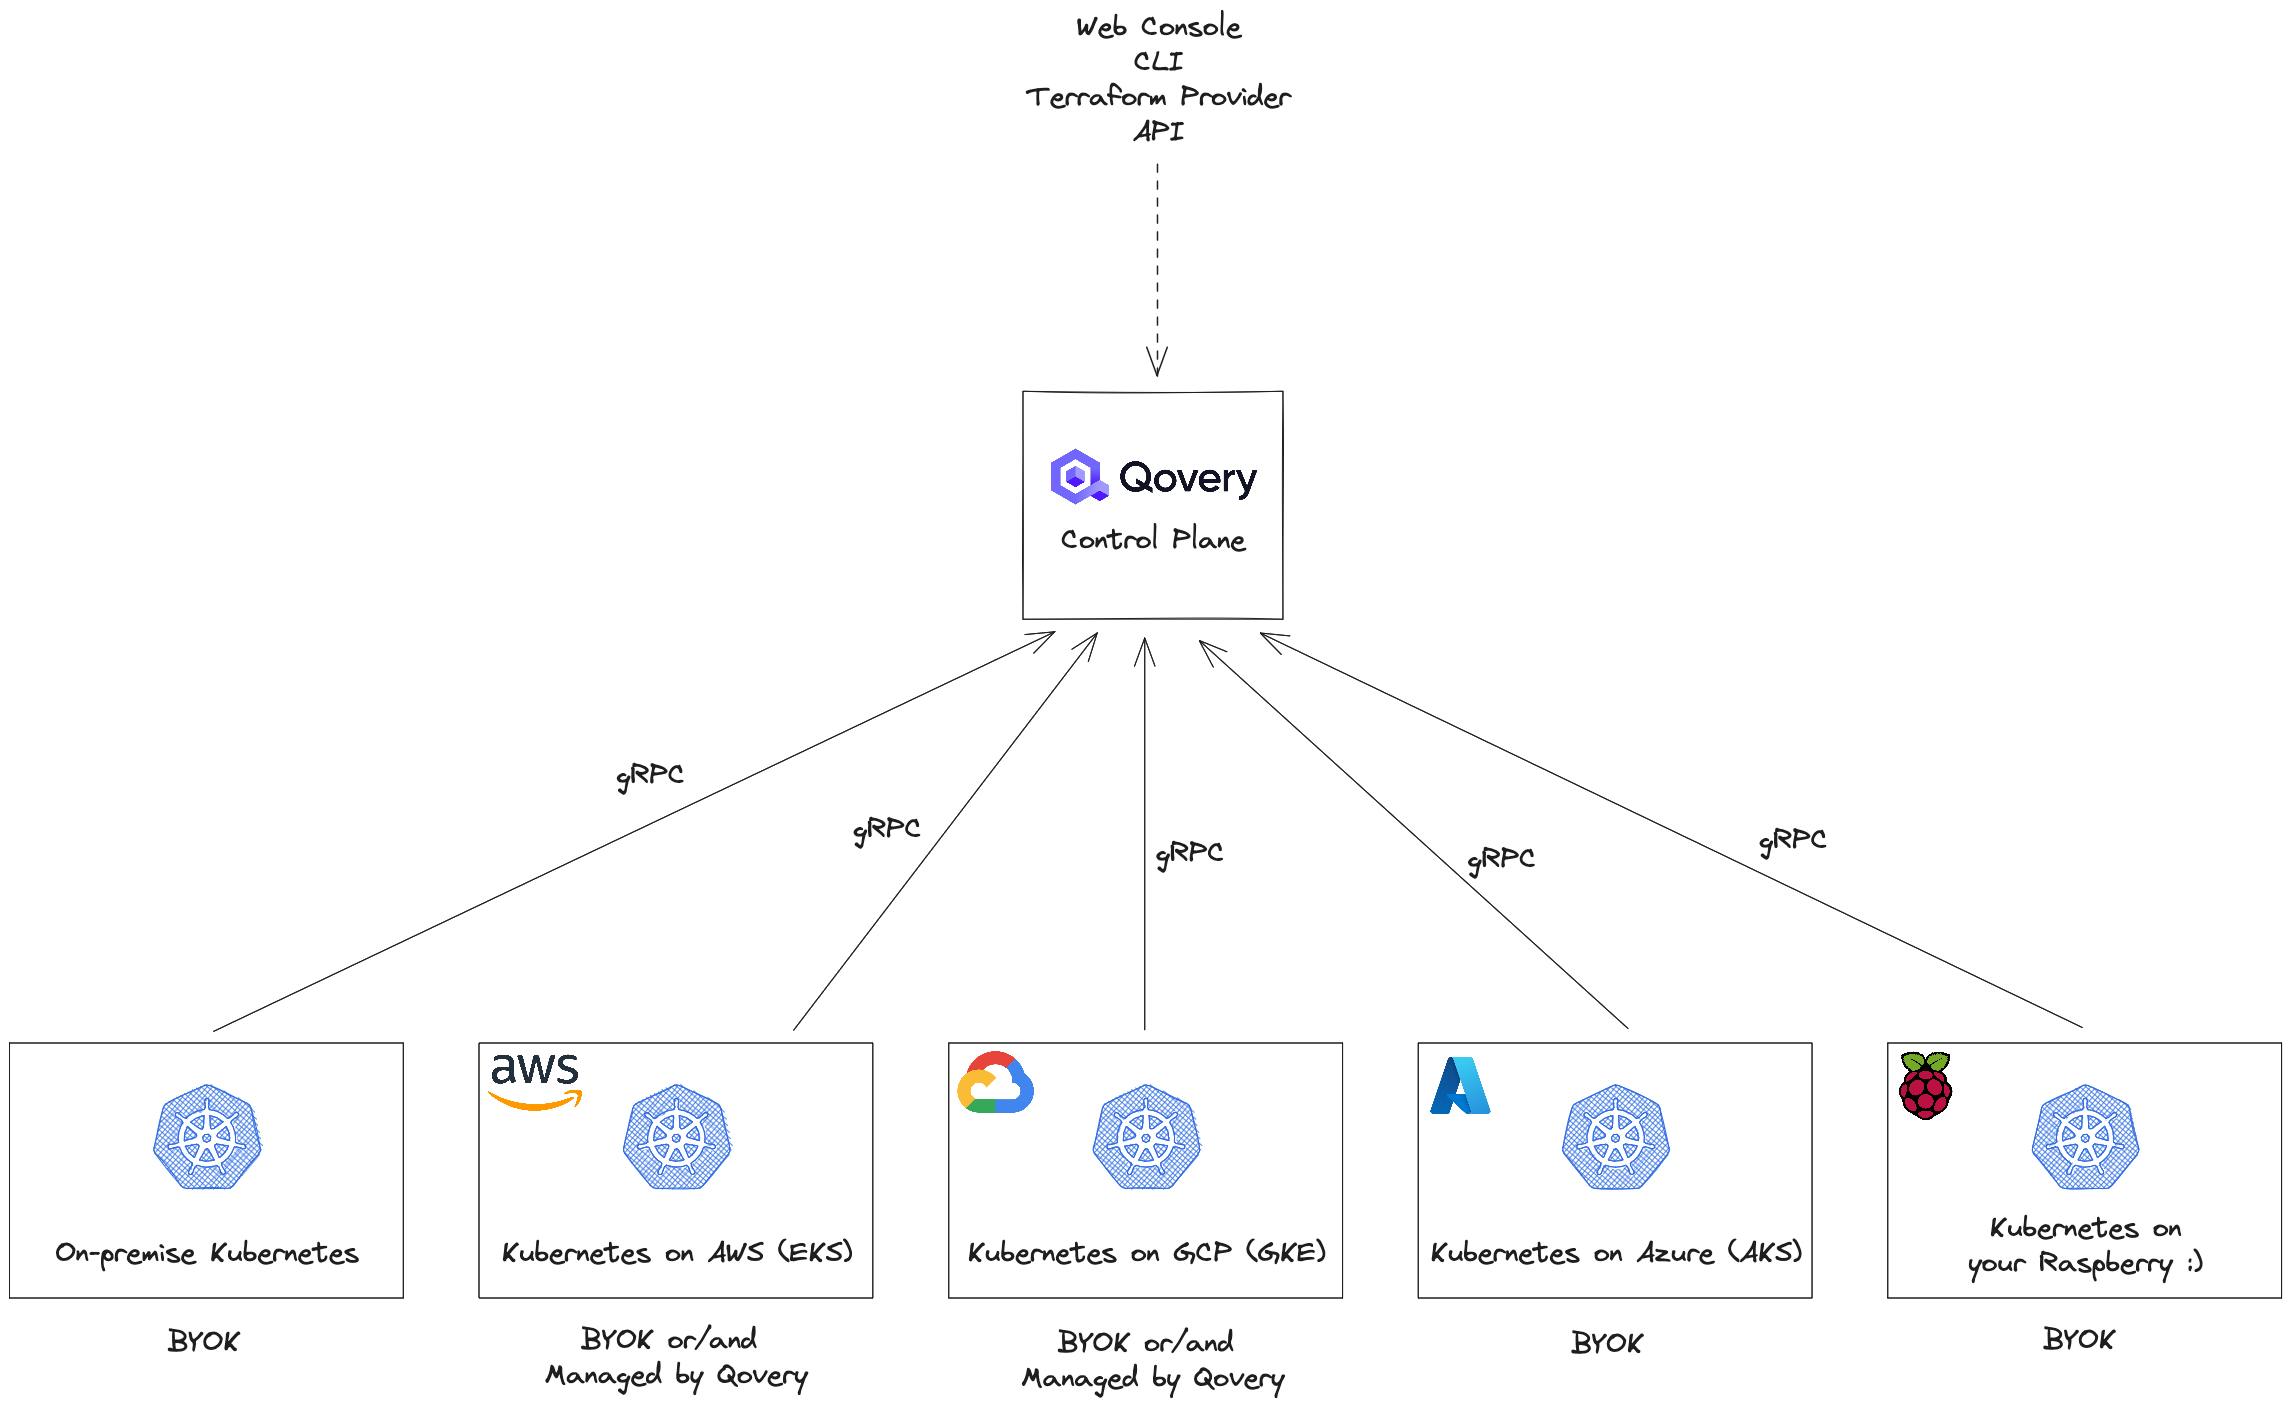 Install Qovery on any Kubernetes cluster(s) - BYOK